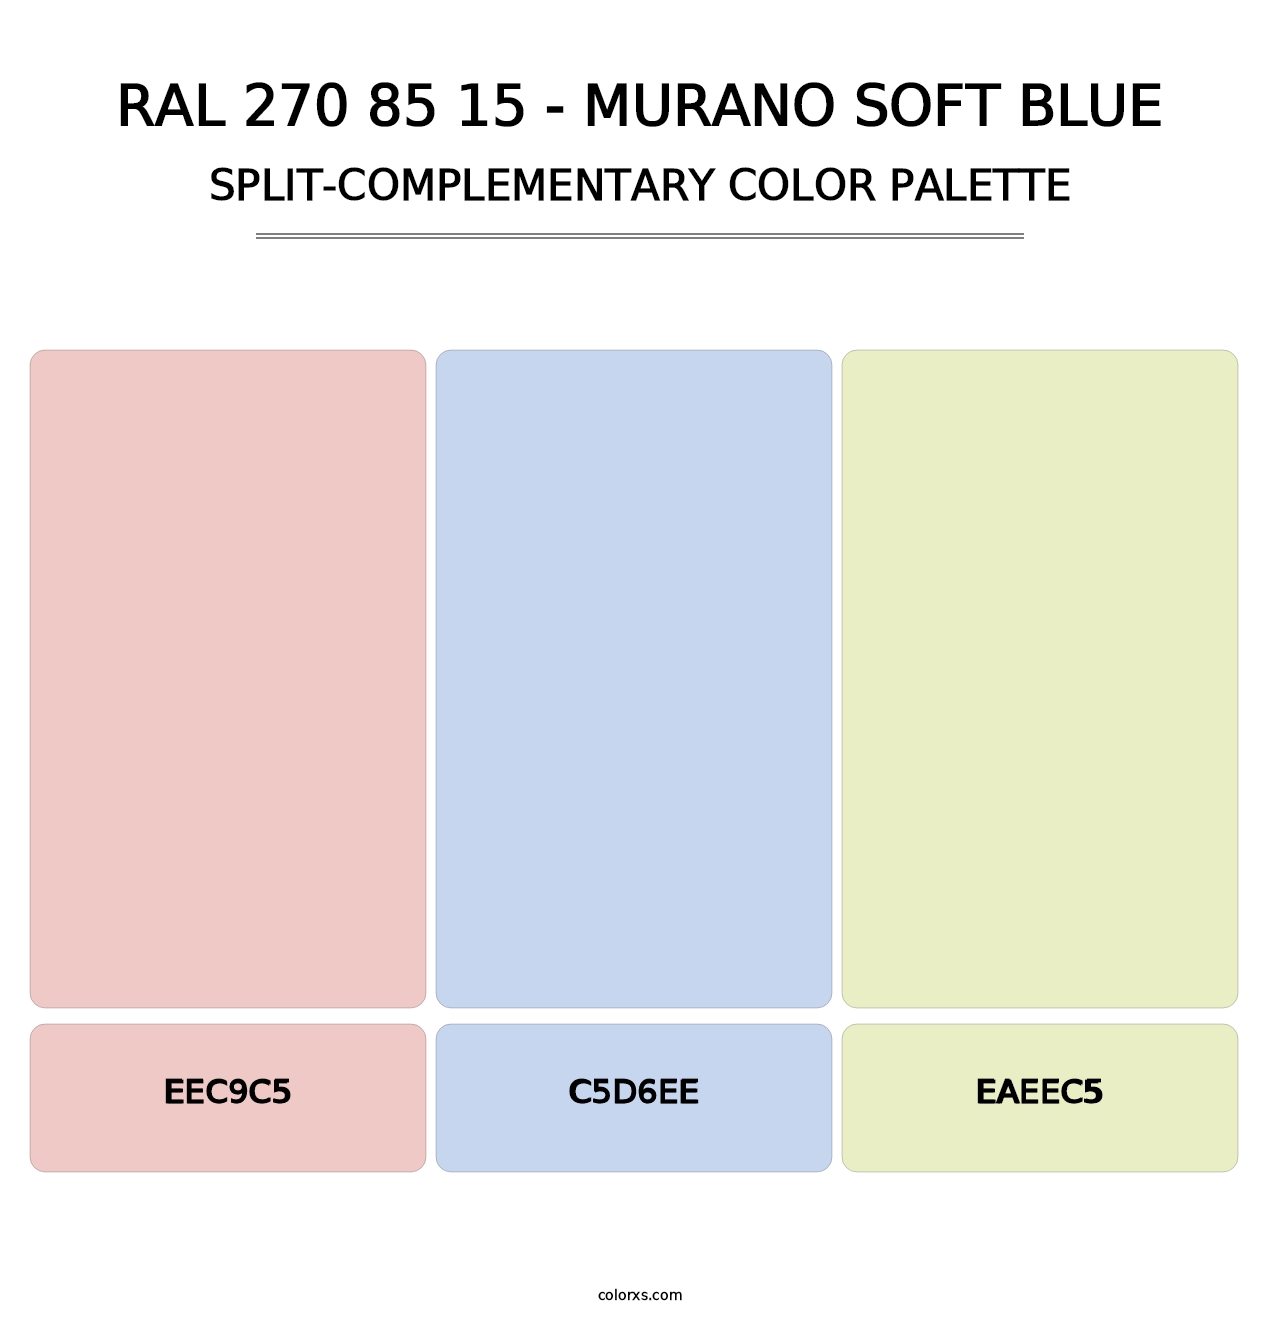 RAL 270 85 15 - Murano Soft Blue - Split-Complementary Color Palette